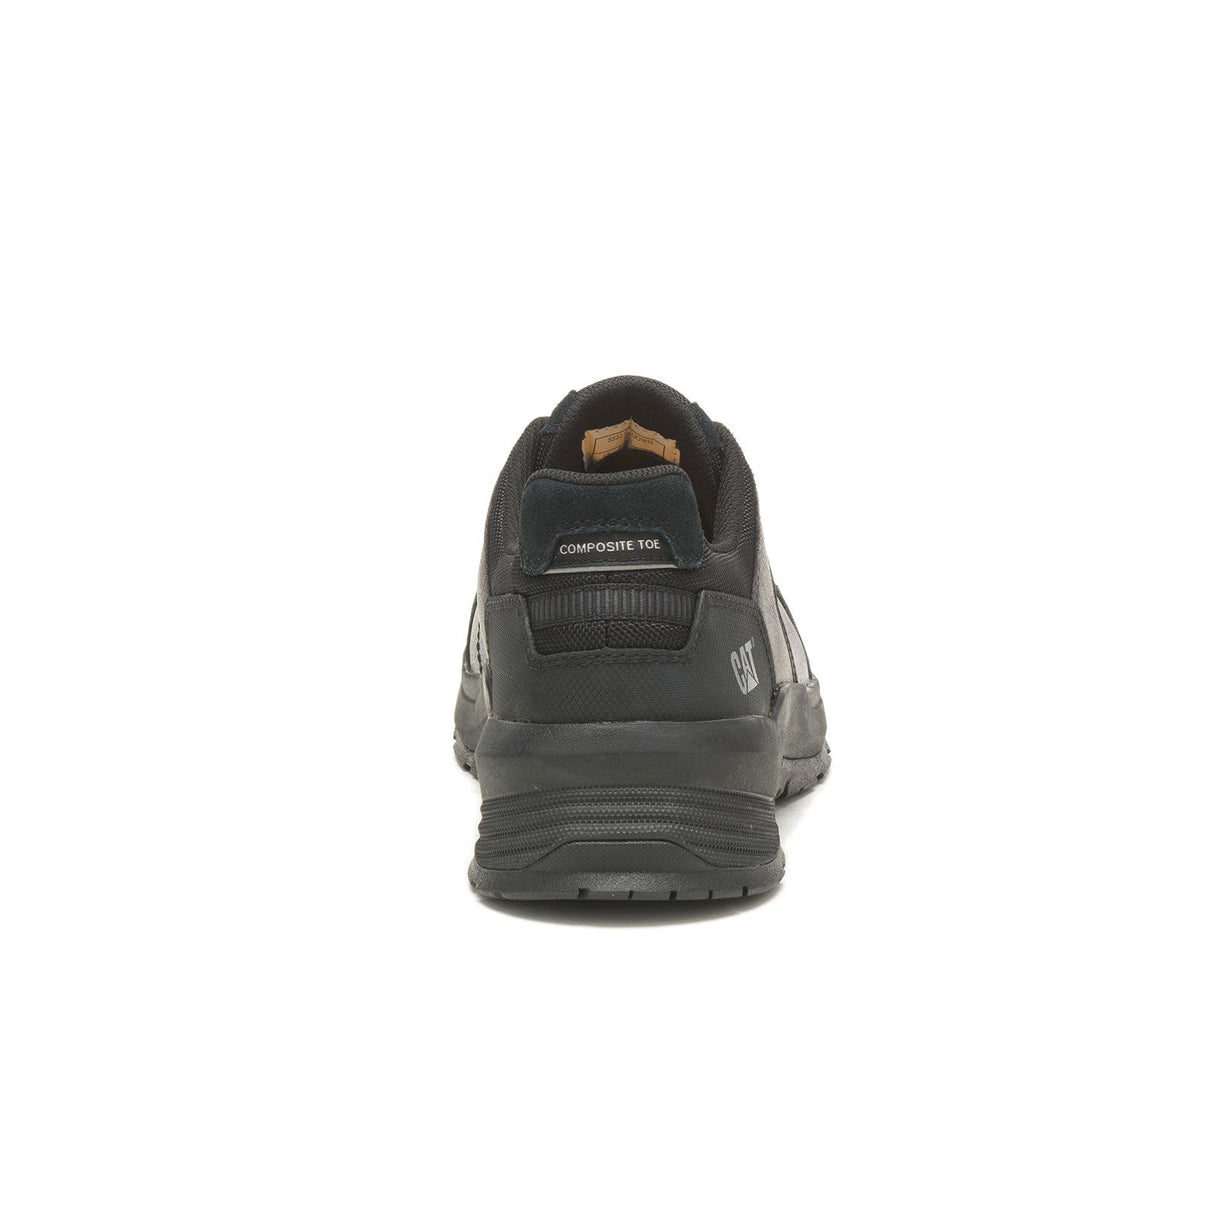 Caterpillar Streamline 2 Le At Her Men's Composite-Toe Work Shoes P91351-3